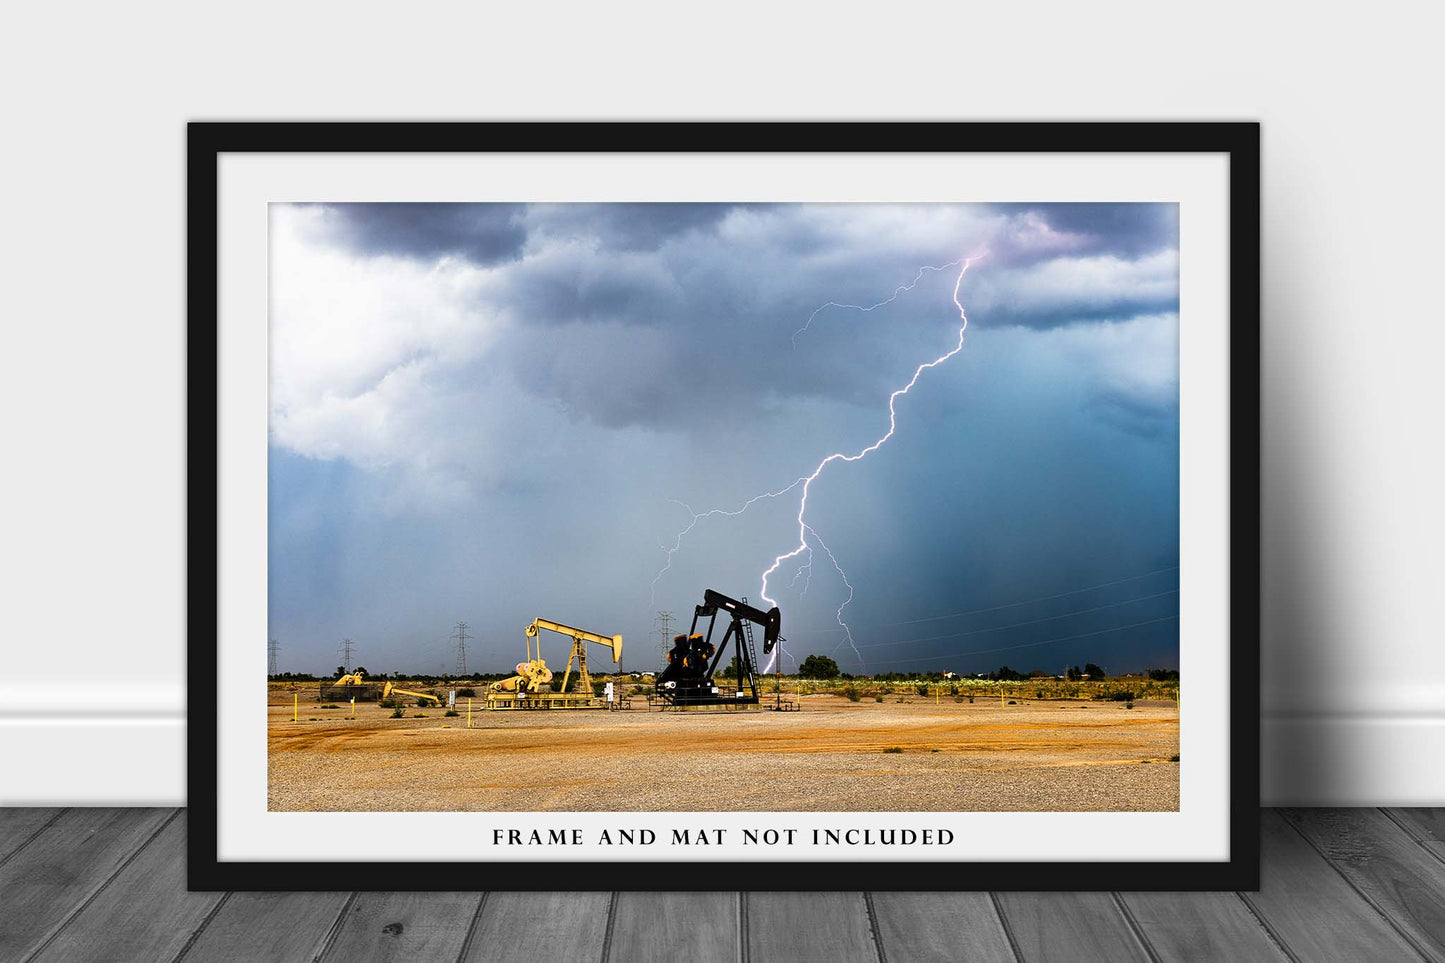 Storm Photography Print (Not Framed) Picture of Lightning Bolt and Pump Jacks on Stormy Day in Oklahoma Oilfield Wall Art Oil and Gas Decor